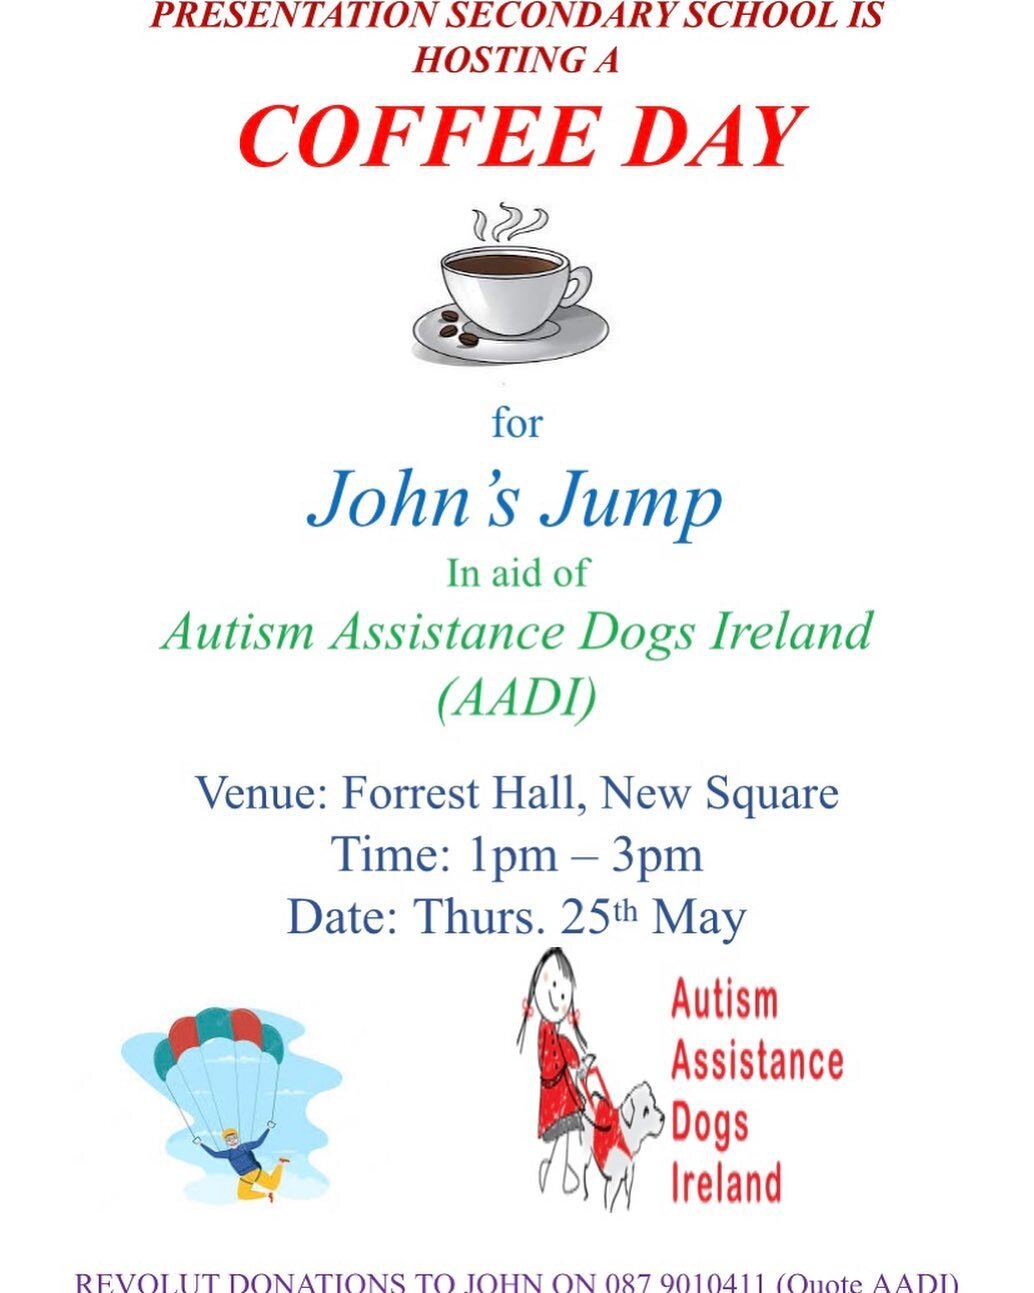 COFFEE DAY ☕️🎂🍰🧁🥮 Presentation Secondary School is hosting a coffee day for John&rsquo;s Jump in aid of Autism Assistance Dogs Ireland. We would love if you could join us on Thursday 25th May between 1-3pm in Forrest Hall, Mitchelstown. Please su